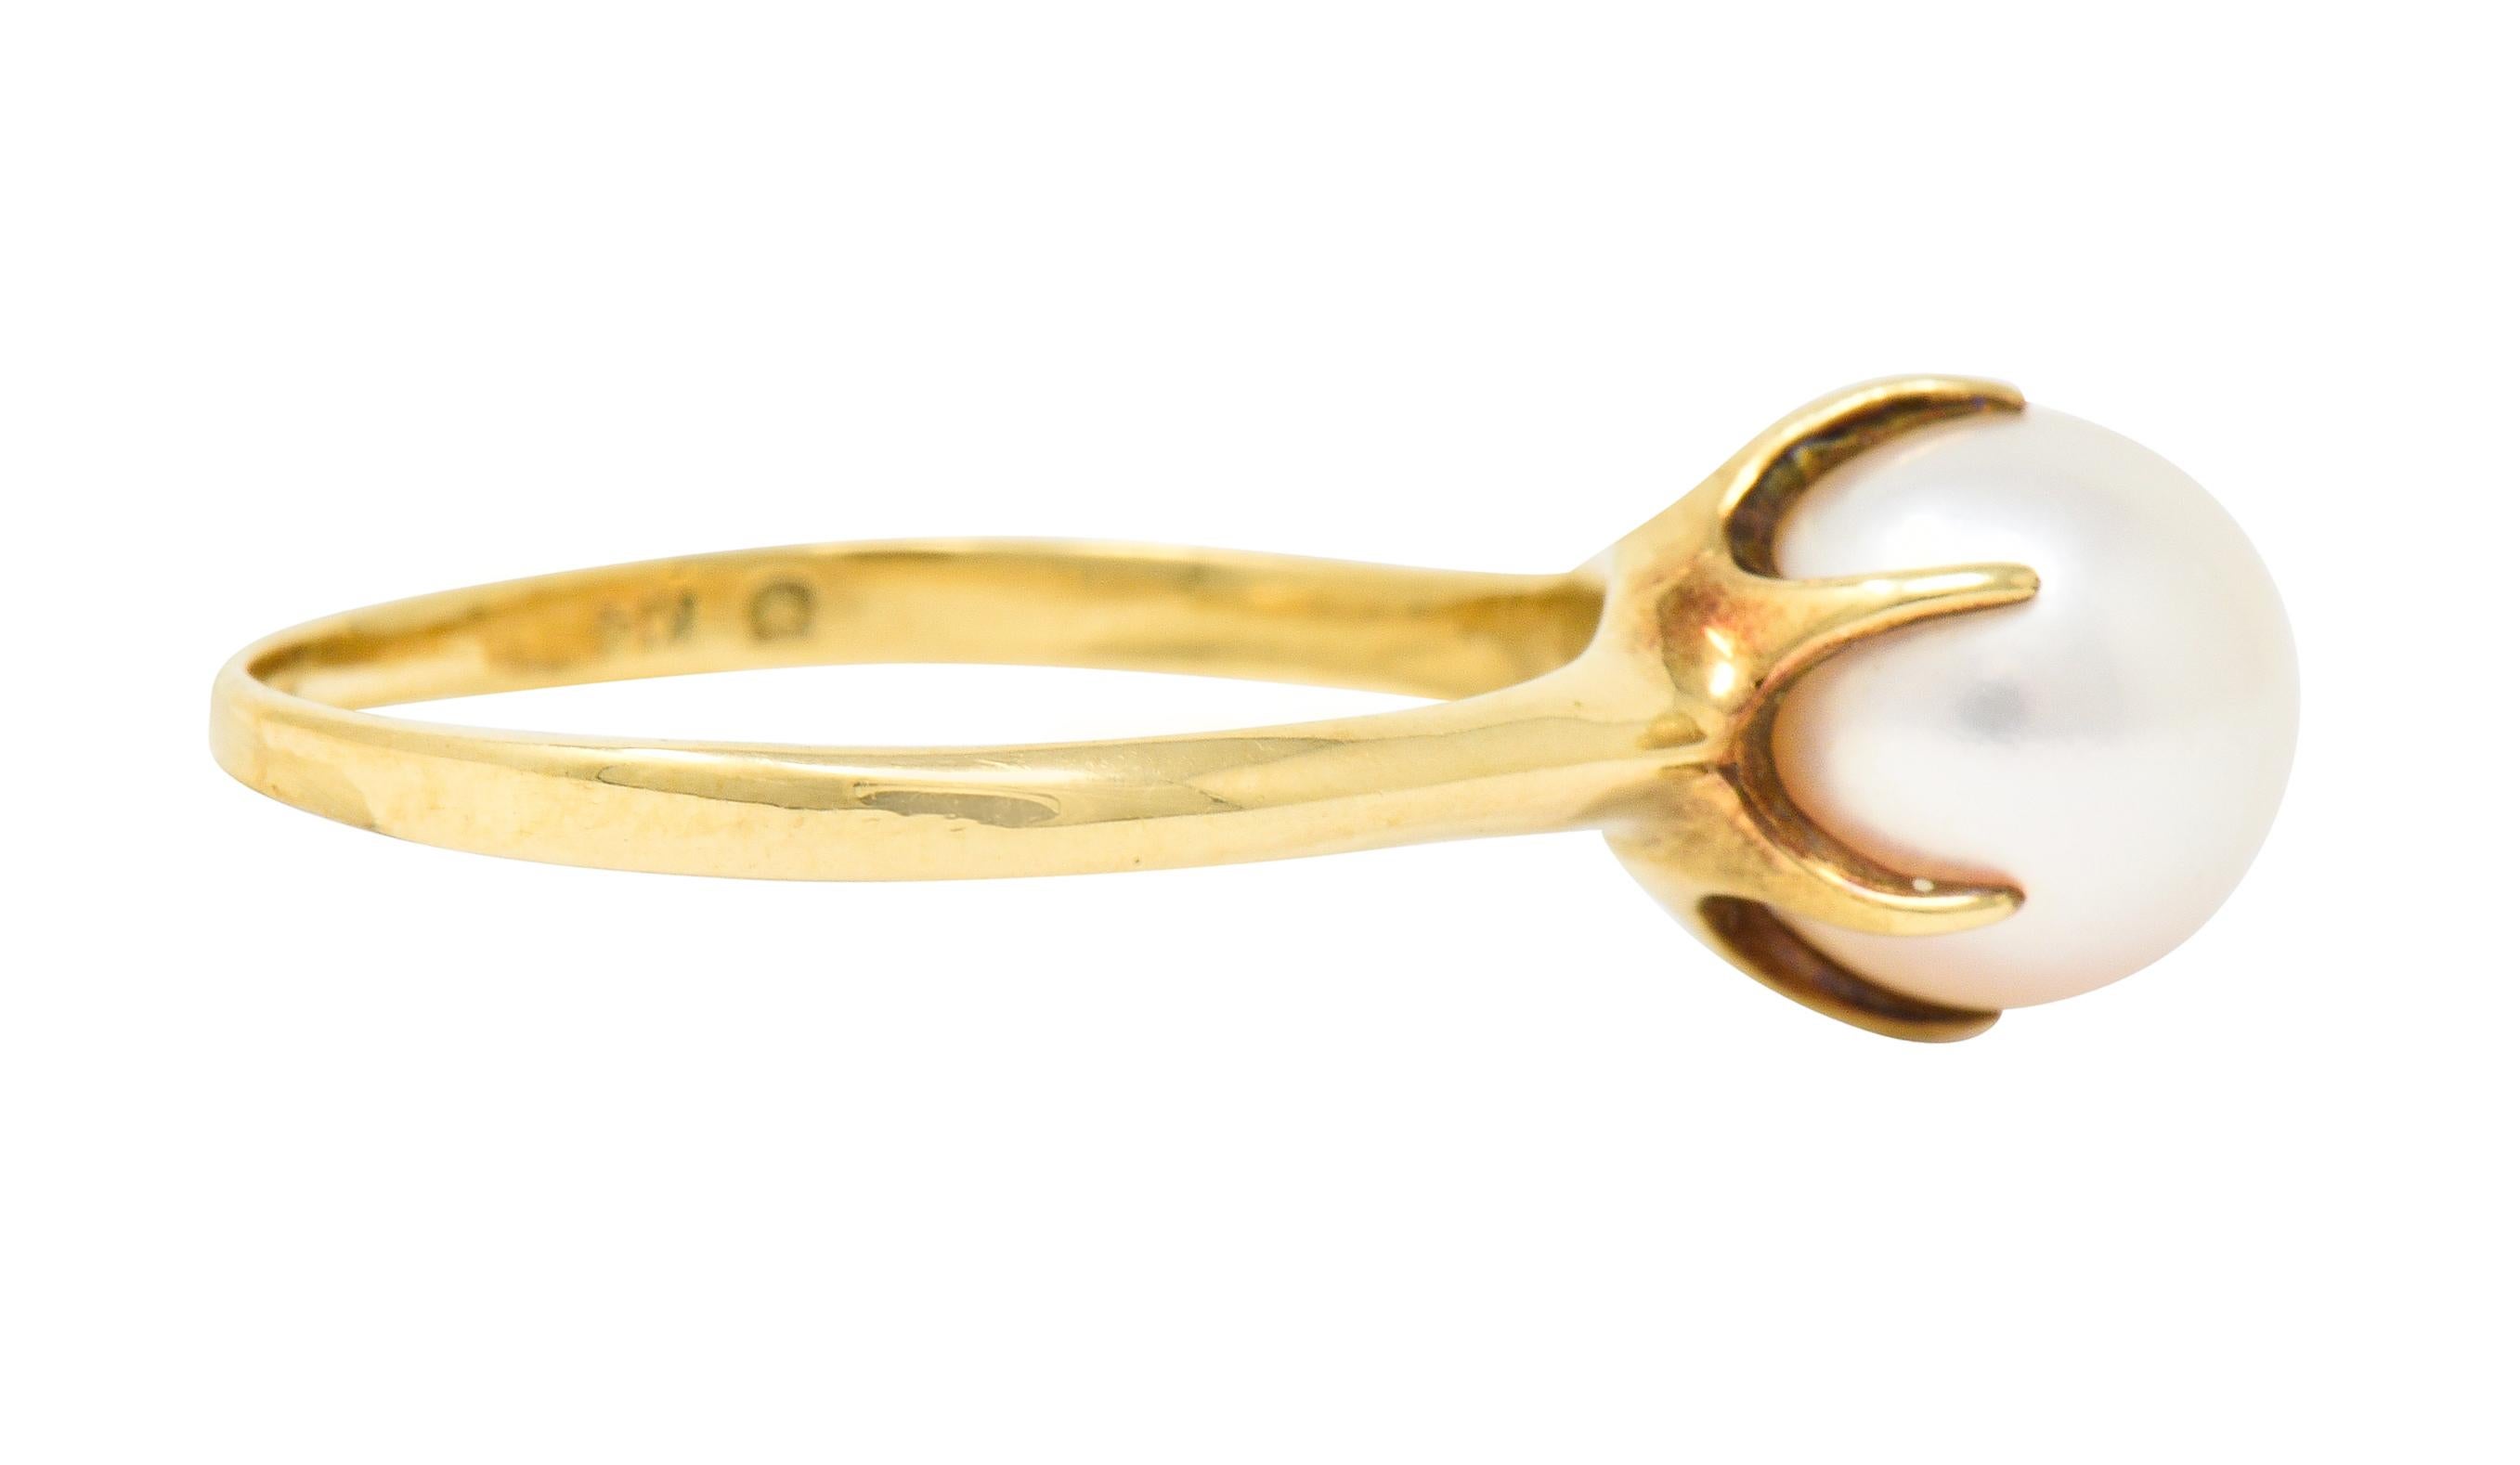 Centering a round cultured pearl measuring approximately 8.5 mm

Cream in body color with strong rosè overtone and excellent luster

Set in a polished gold pearl cup with striking talon prongs

Completed by a simple polished gold band with very